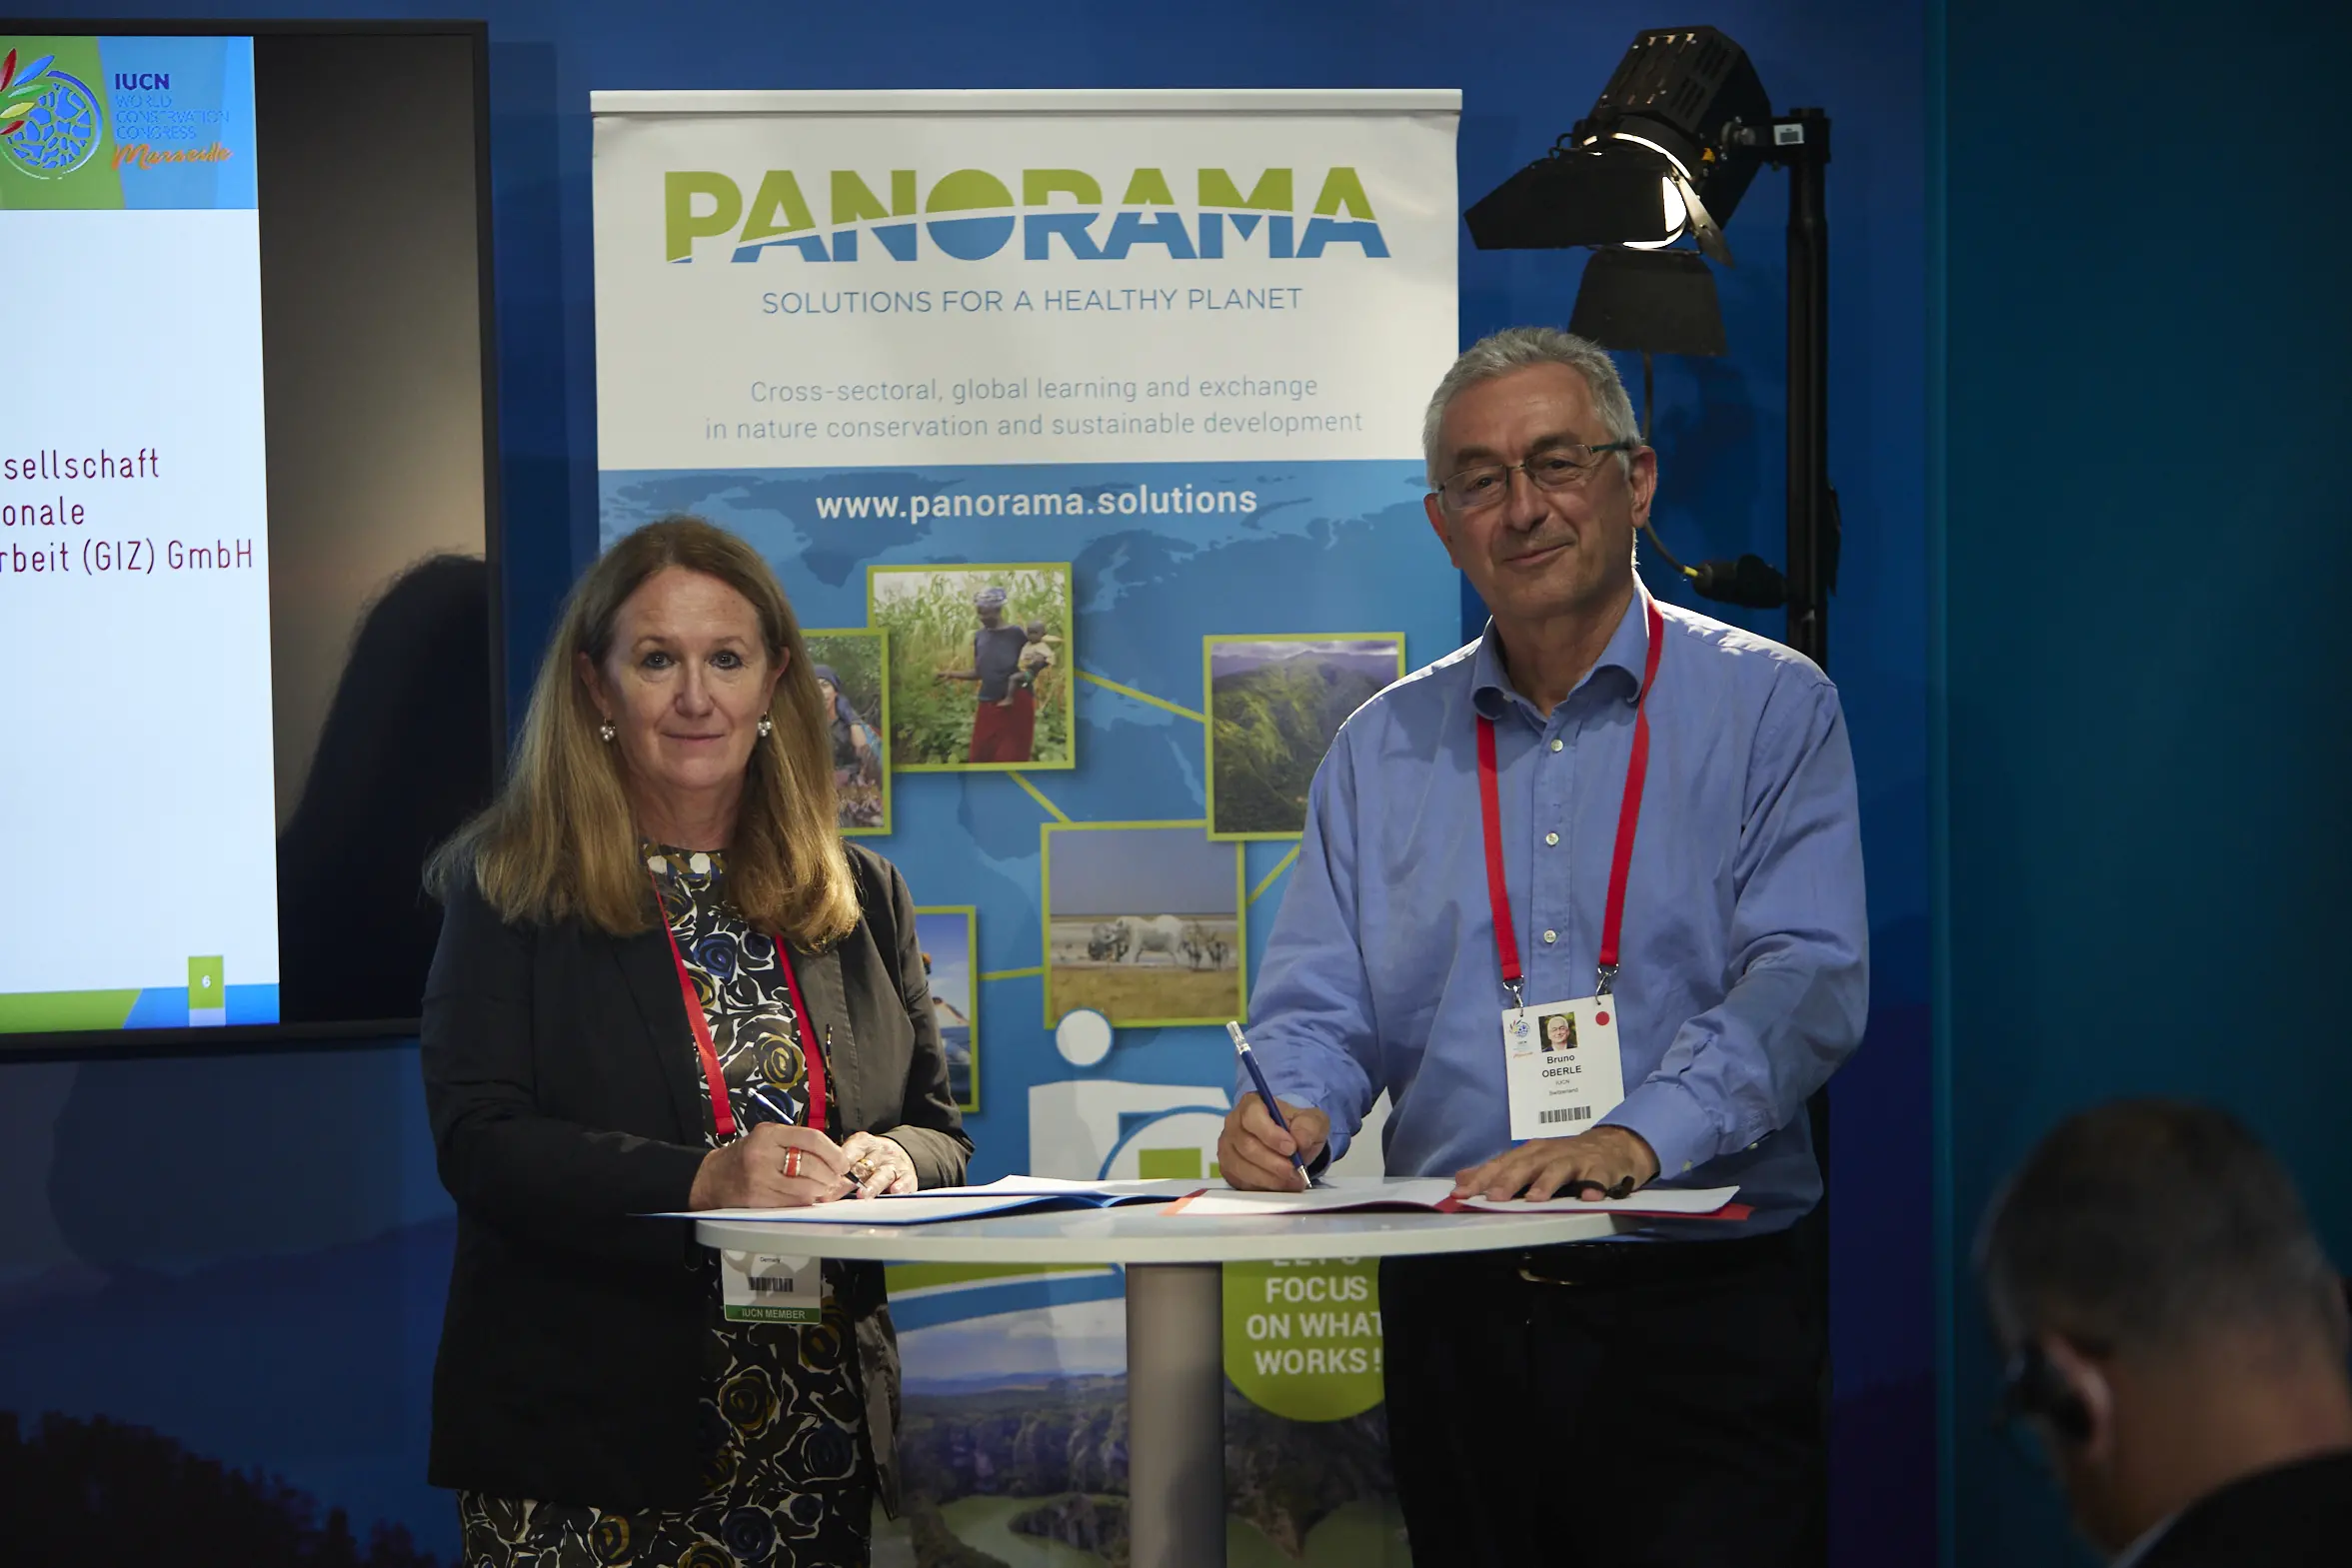 Ingrid-Gabriela Hoven (GIZ) and Dr. Bruno Oberle (IUCN) renew commitment to PANORAMA